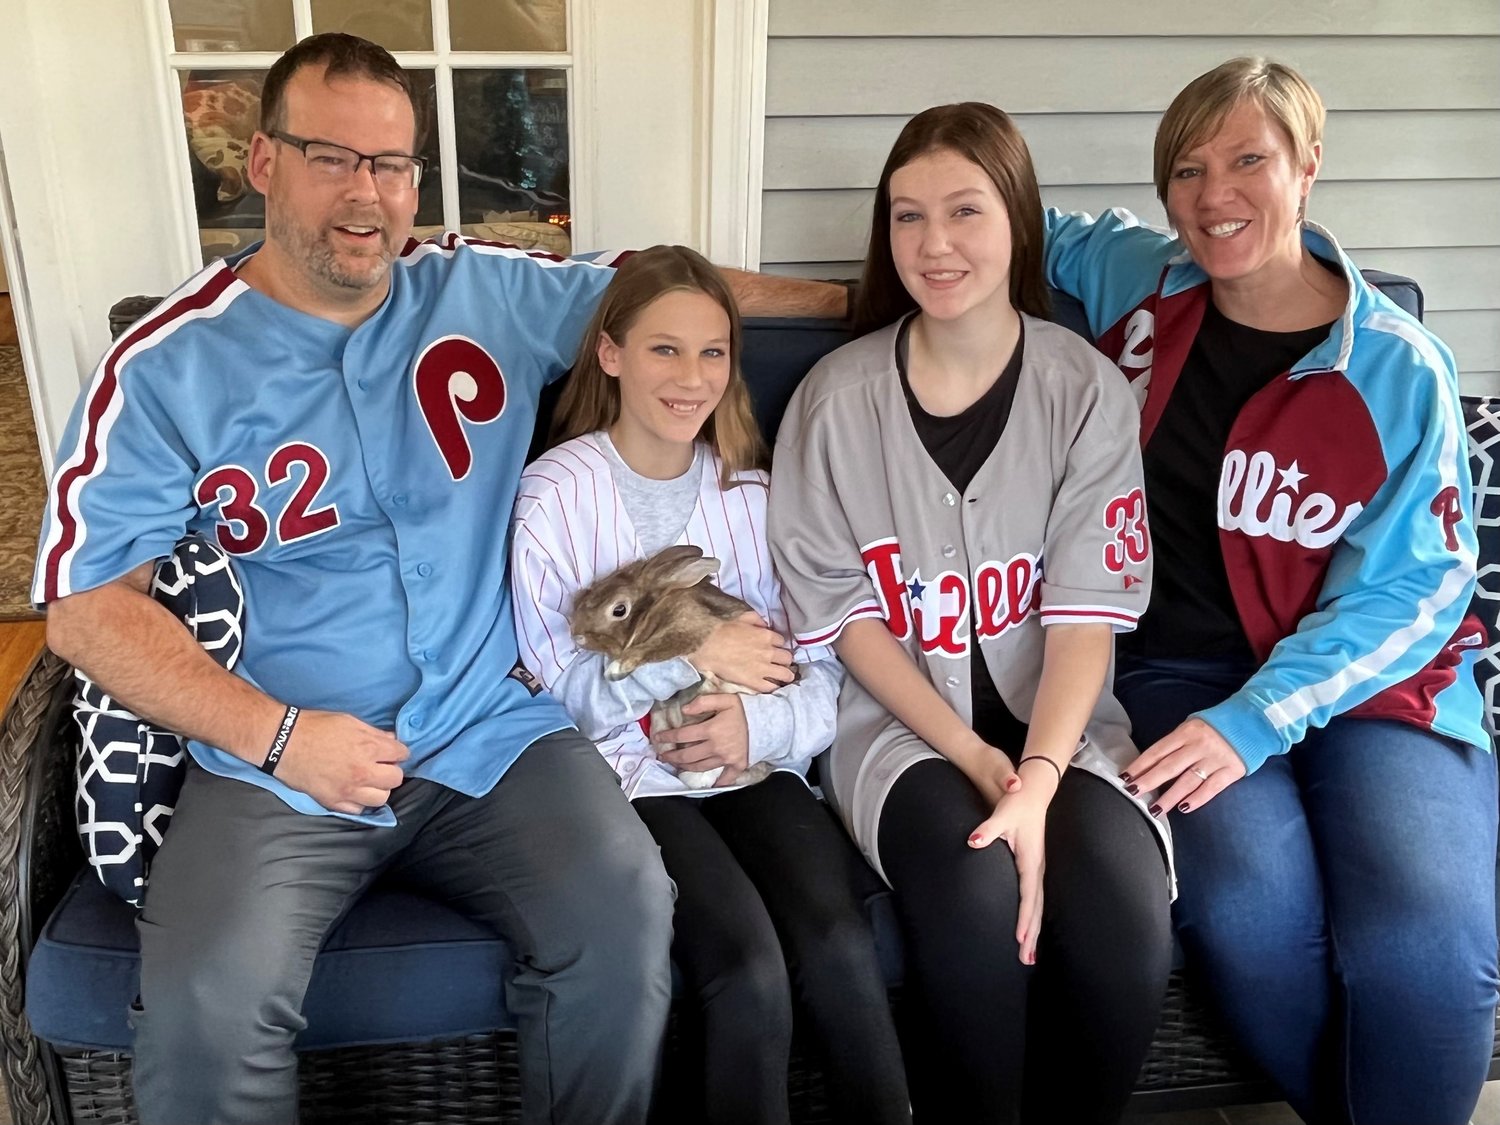 The Peloquin family, from left, Jeremy, Emma, Ryley and Kelley, with Harper the bunny, adopted from the Bucks County SPCA. Harper joined the family after Emma and her father made a bet during Game 5 of the National League Championship Series that she could adopt a bunny if the Philadelphia Phillies’ Bryce Harper hit a home run in his next at bat, which he did.